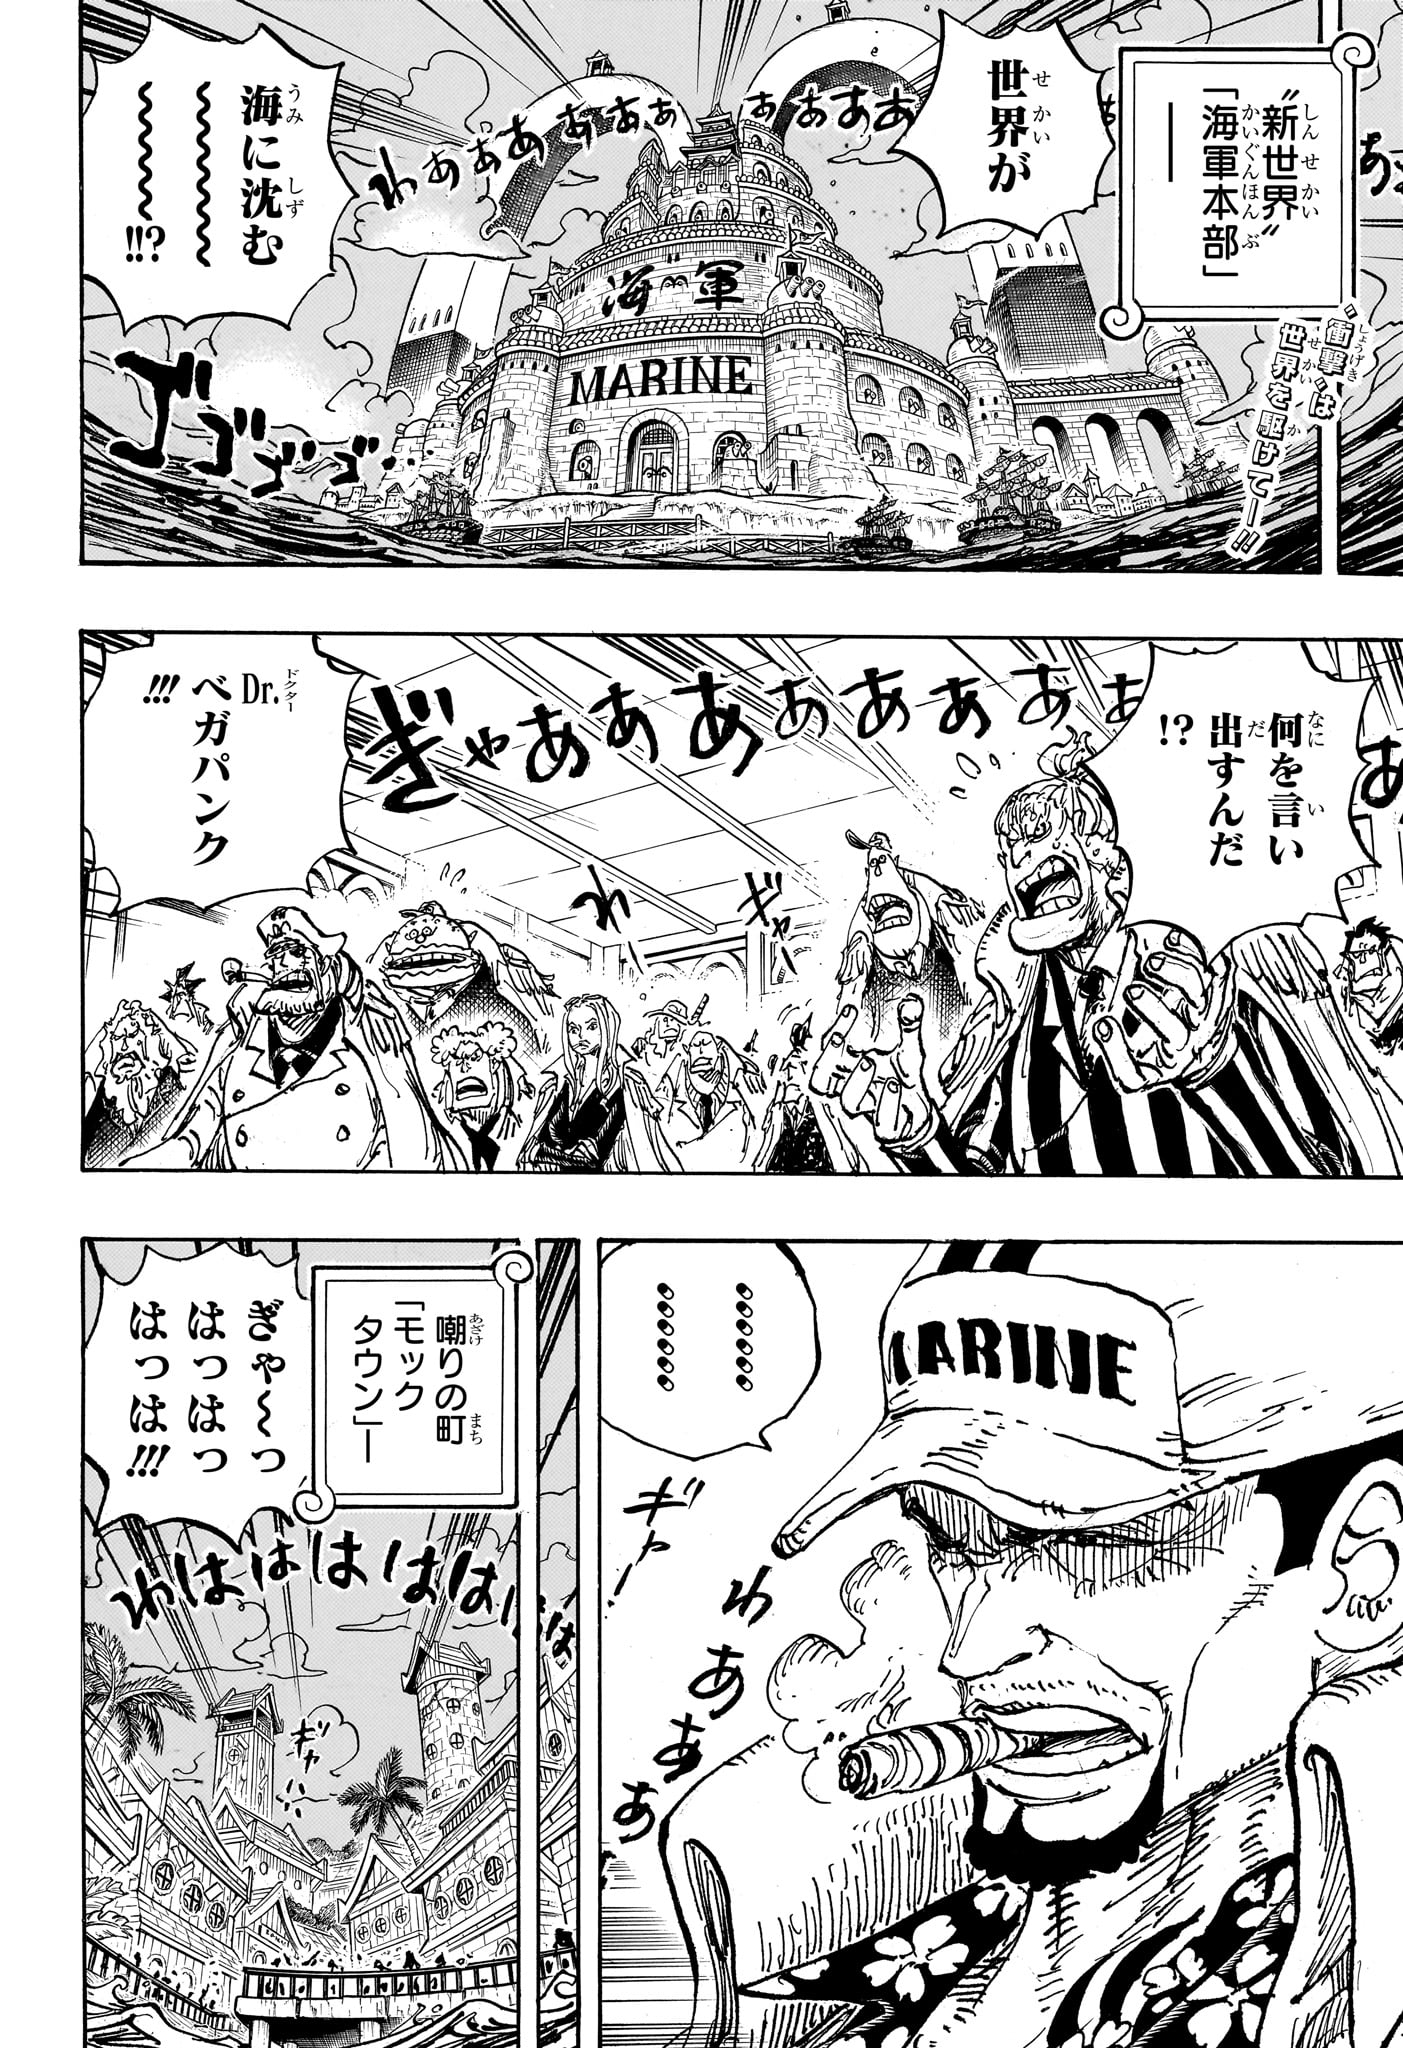 One Piece - Chapter 1114 - Page 2